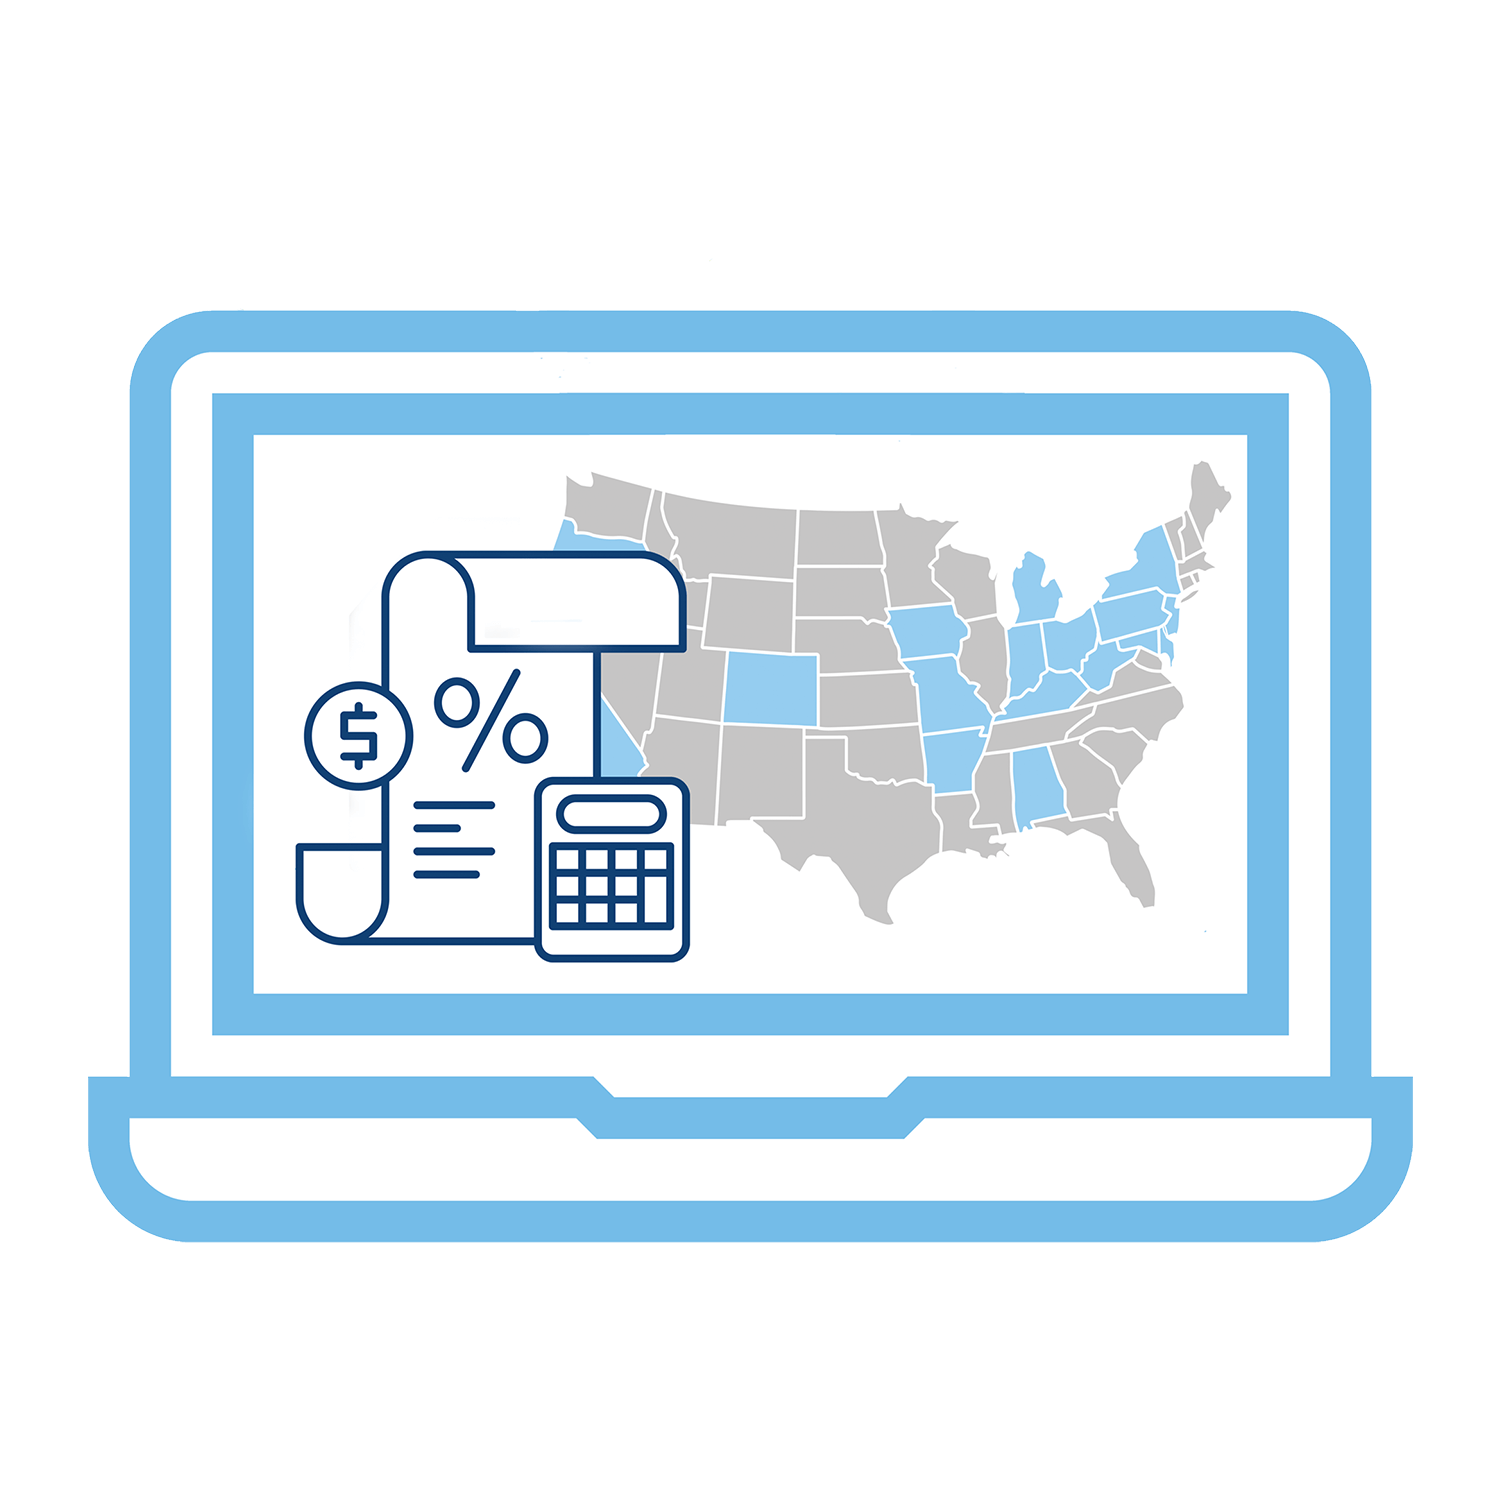 Image of a laptop with a United States map and a calculator